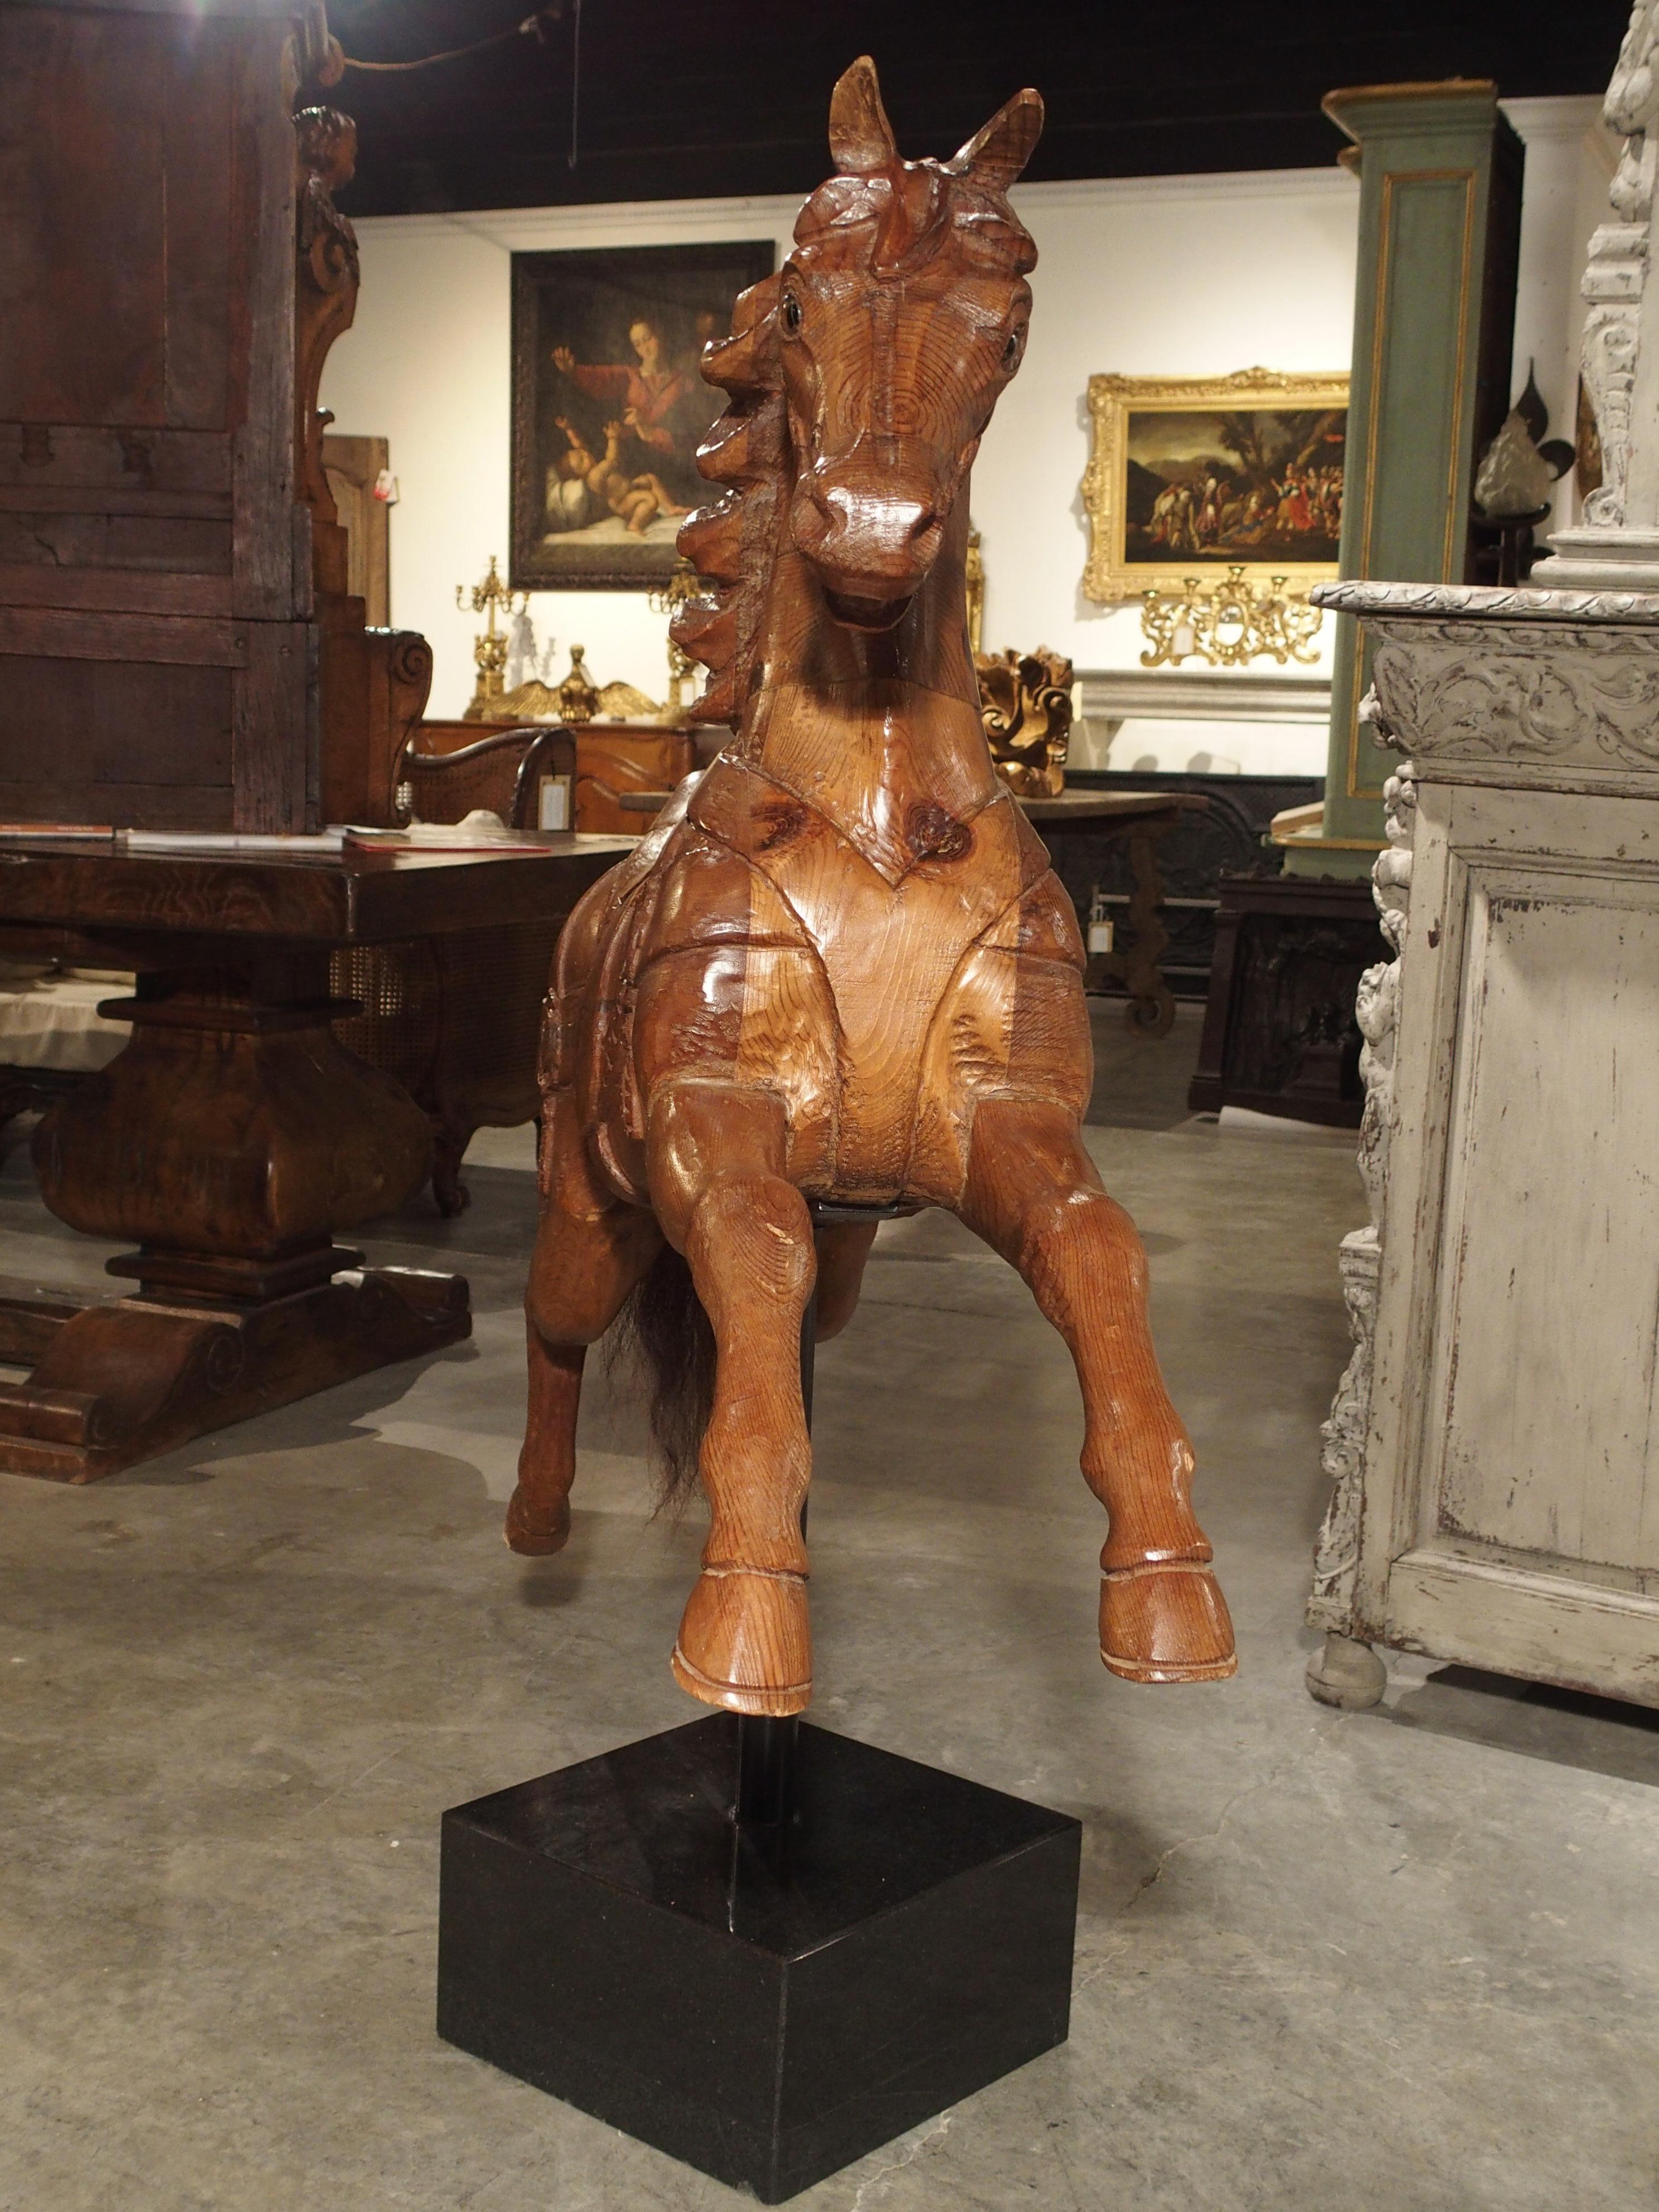 Early 20th Century Wooden Jumping Horse on Stand from Barcelona Spain, circa 1900